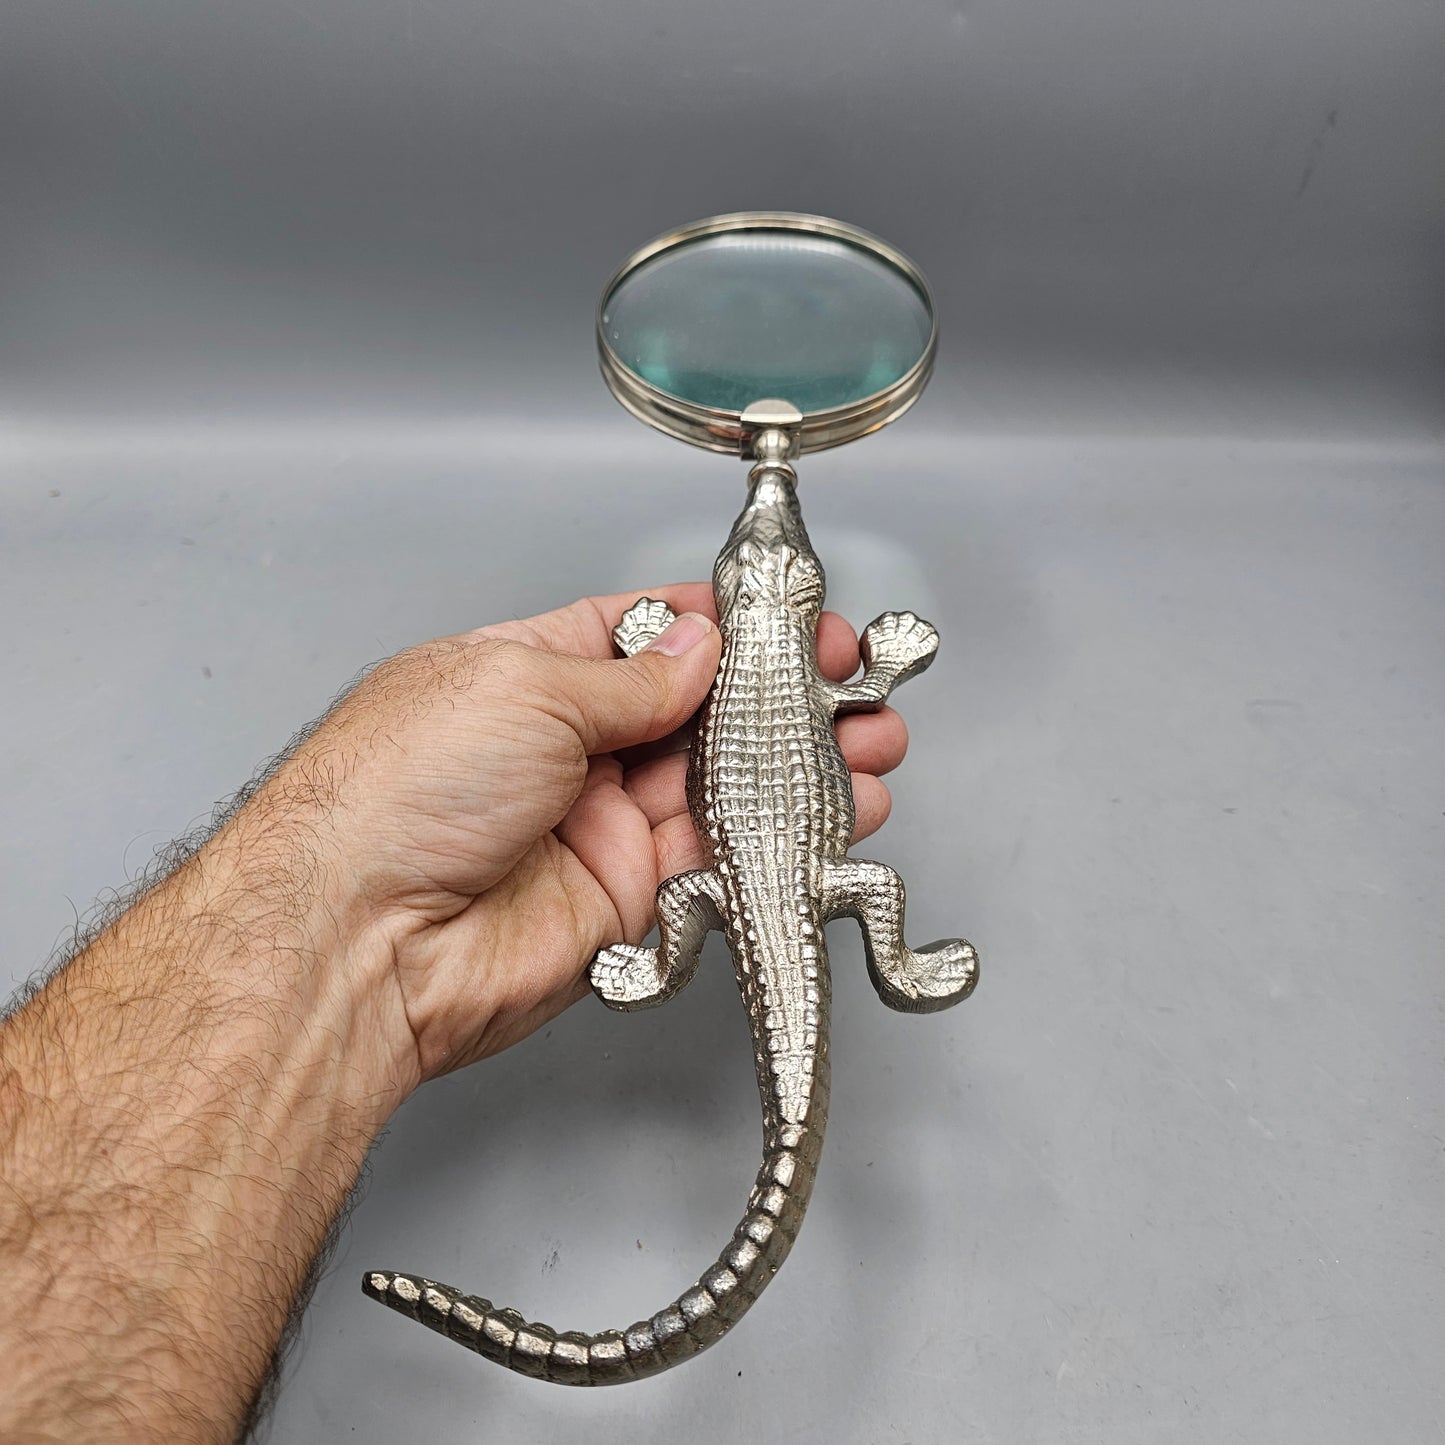 Nickel Finish Magnifying Glass with Lizard Shaped Handle